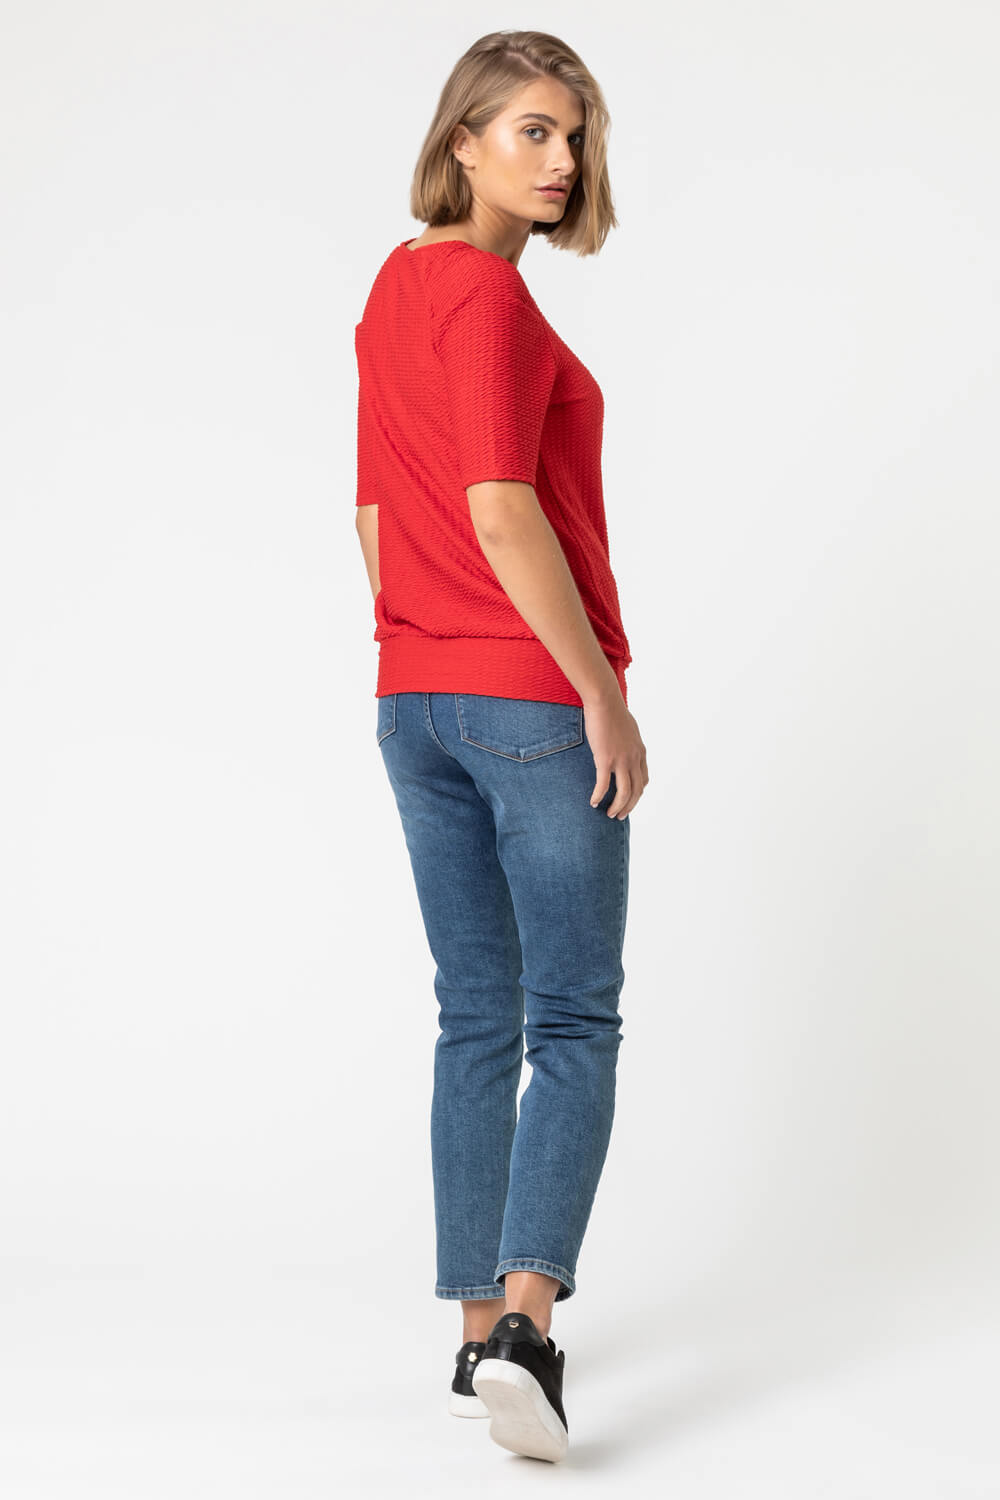 Red Keyhole Neck Textured Top, Image 2 of 4